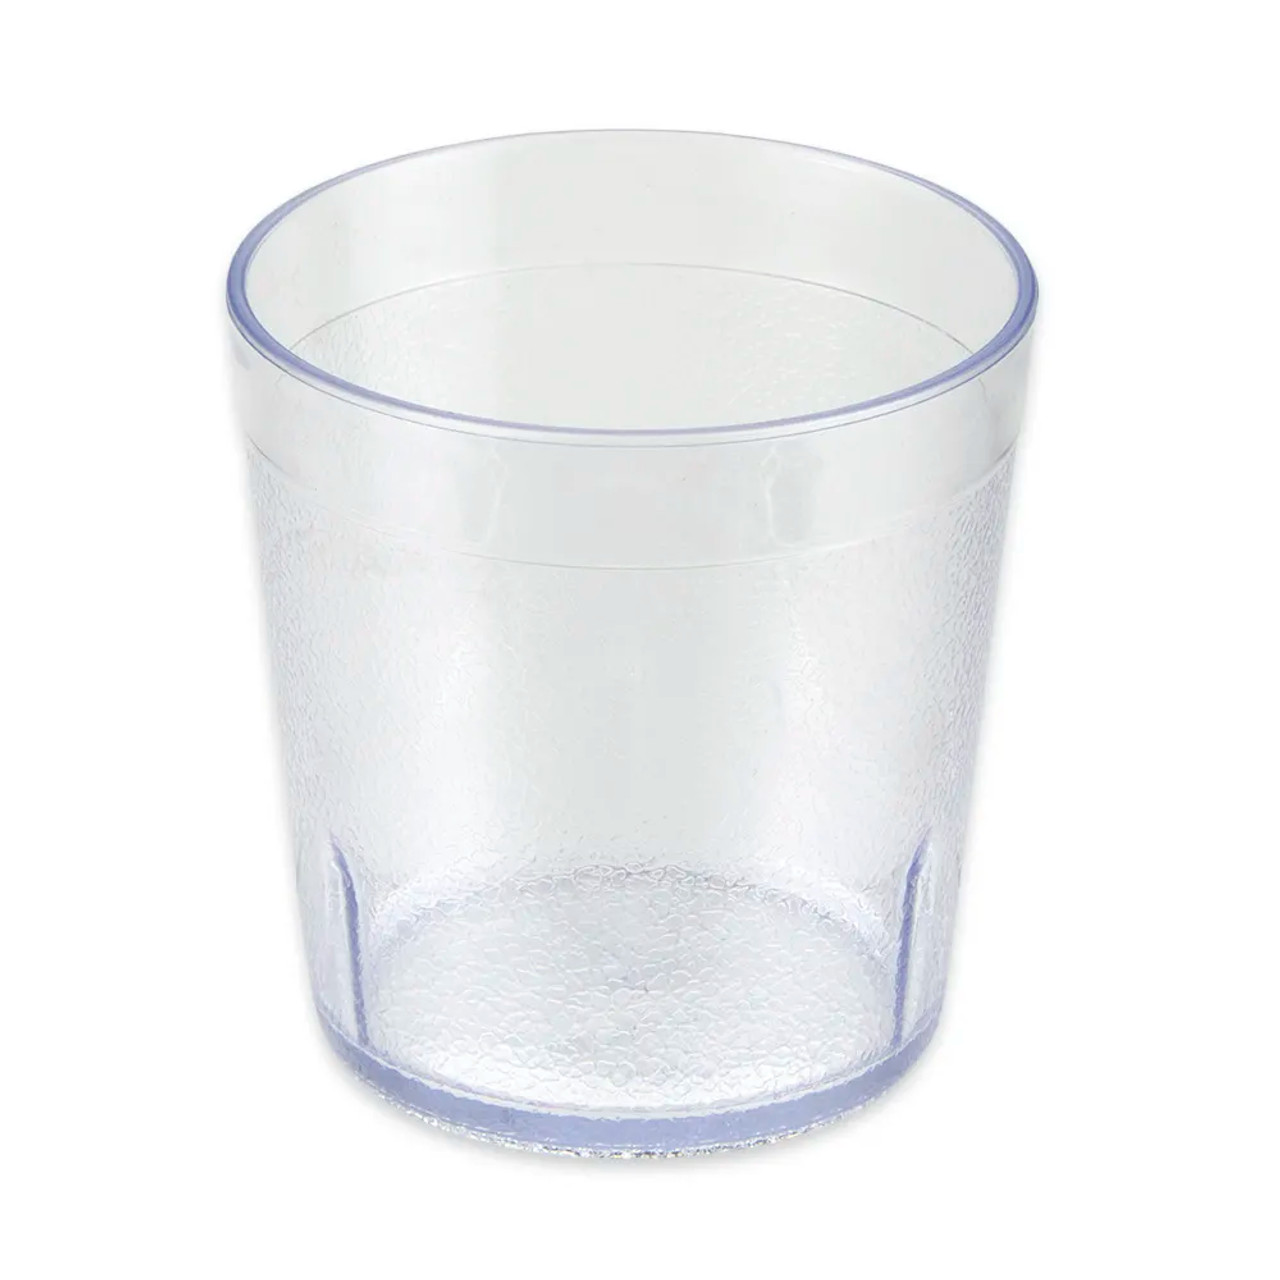 GET 10 oz Clear Textured Plastic Juice Tumbler (72/Case) - Durable SAN Material - Chicken Pieces